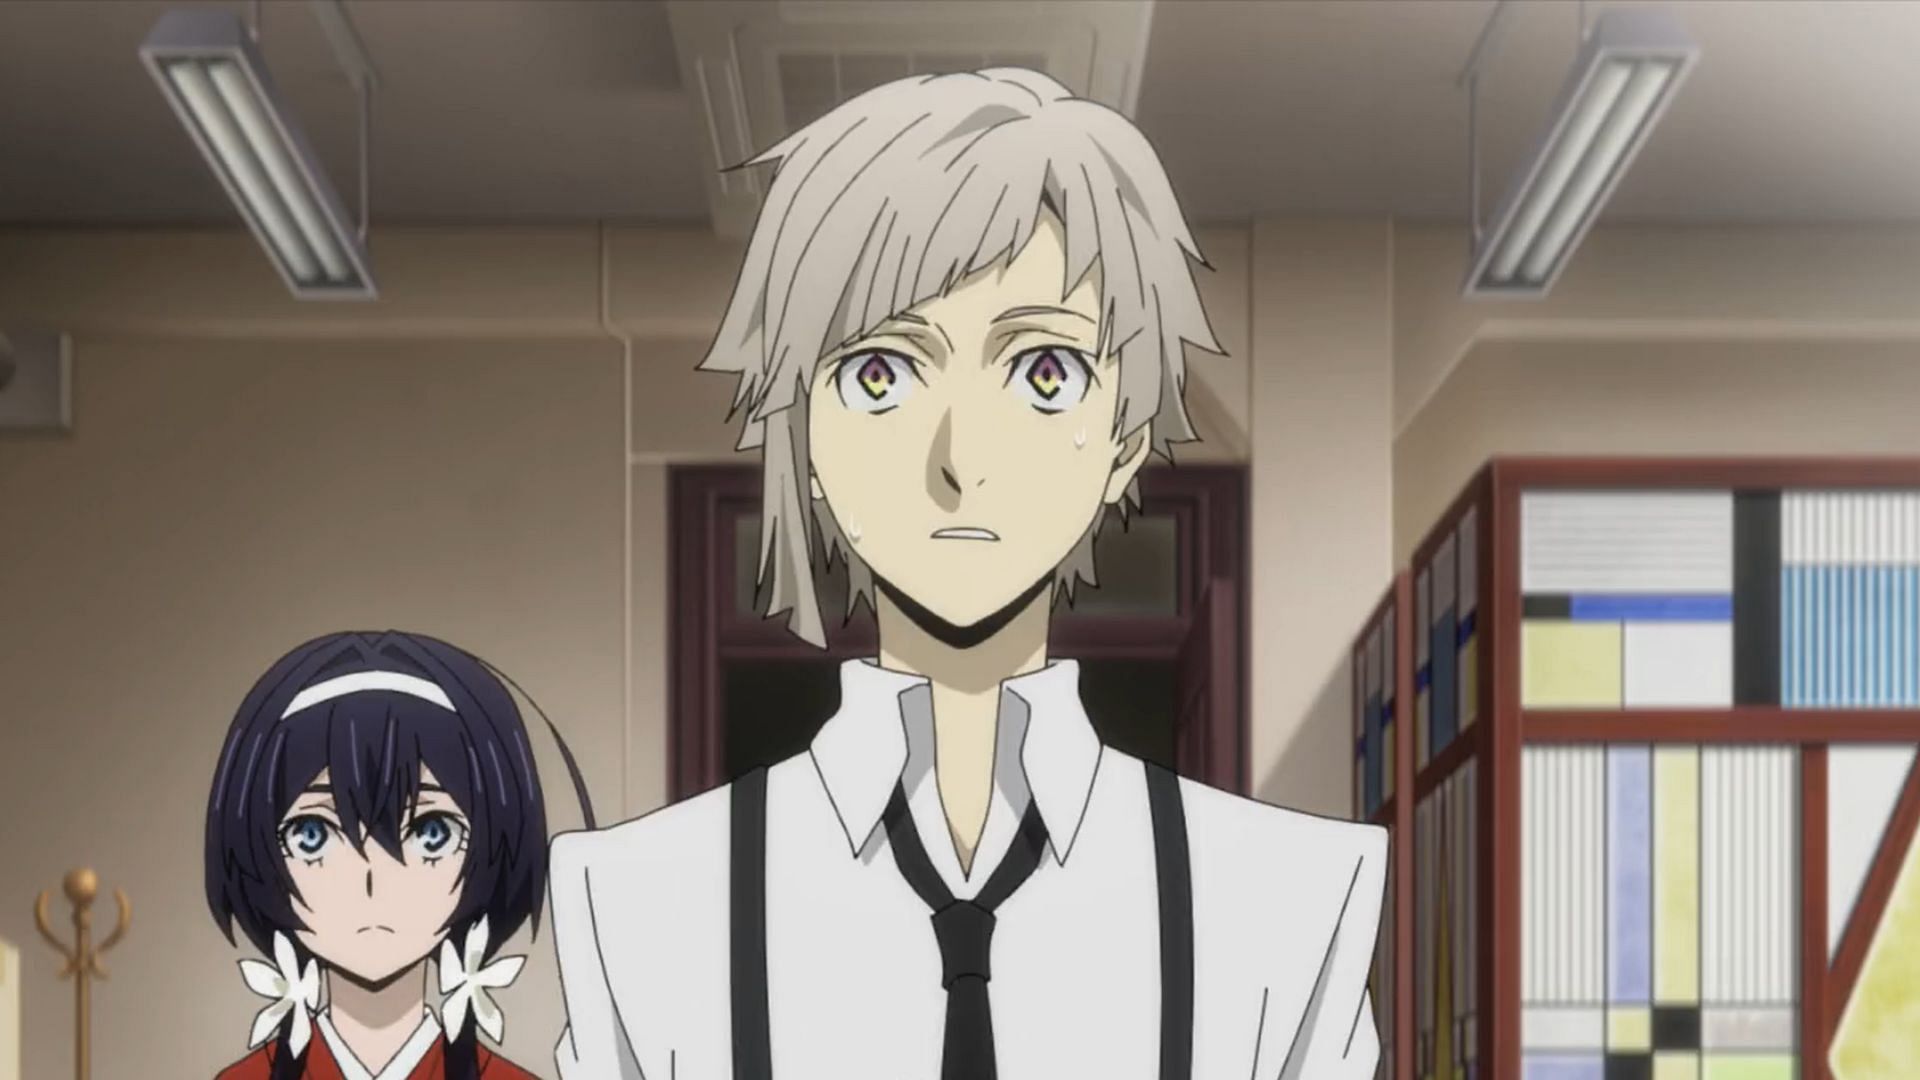 Bungo Stray Dogs Season 5 Episode 5 Review - But Why Tho?